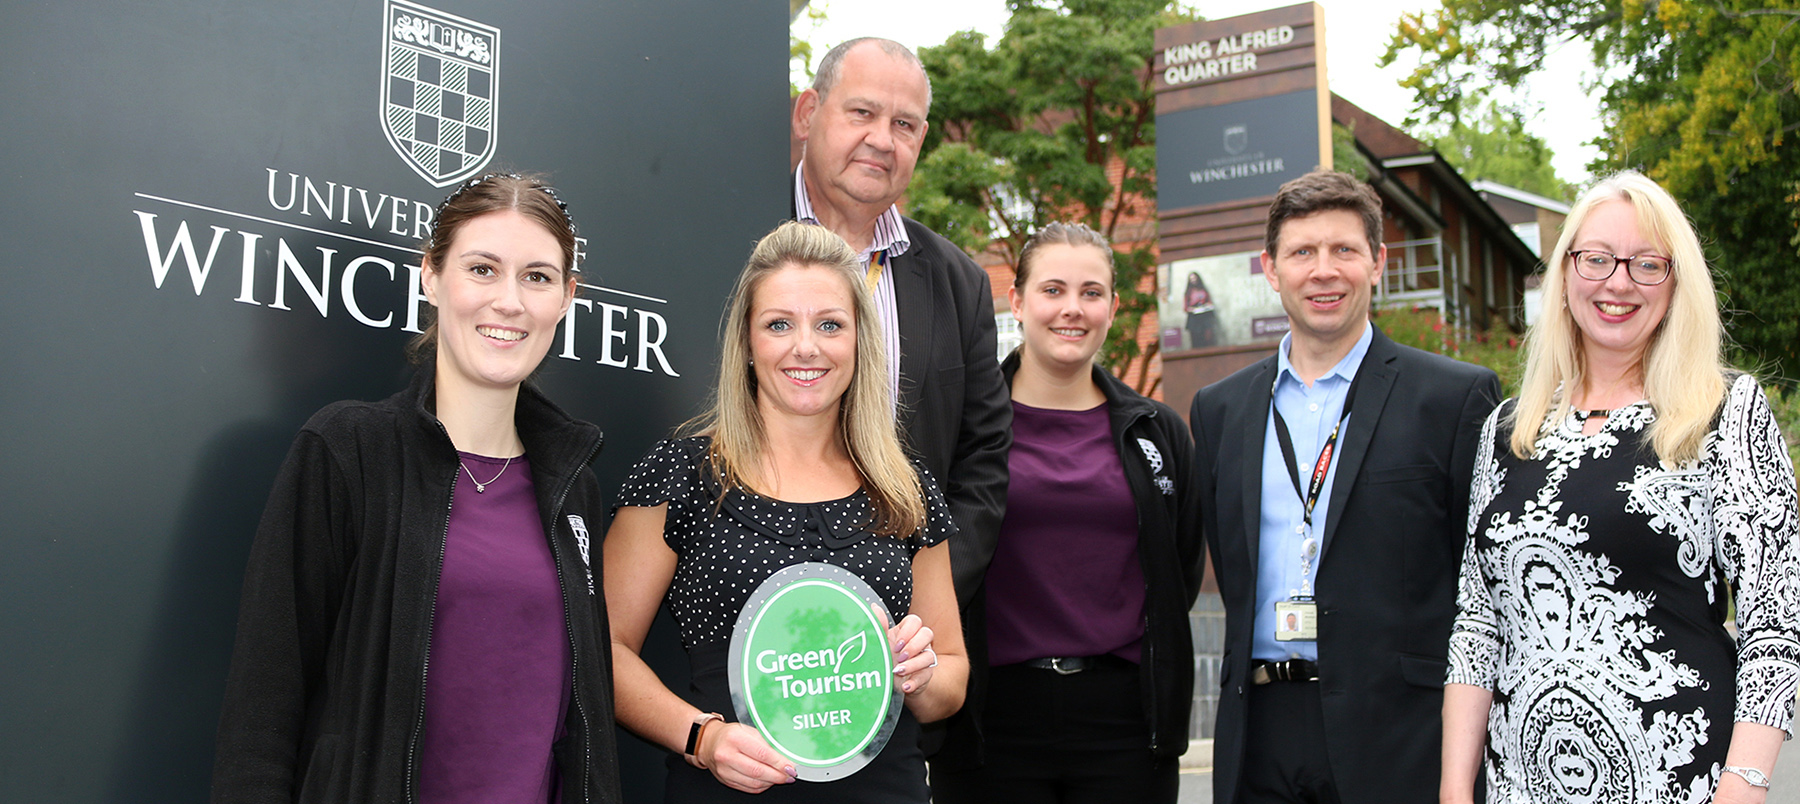 Conferencing and catering staff with their green Tourism Silver Award outside the University